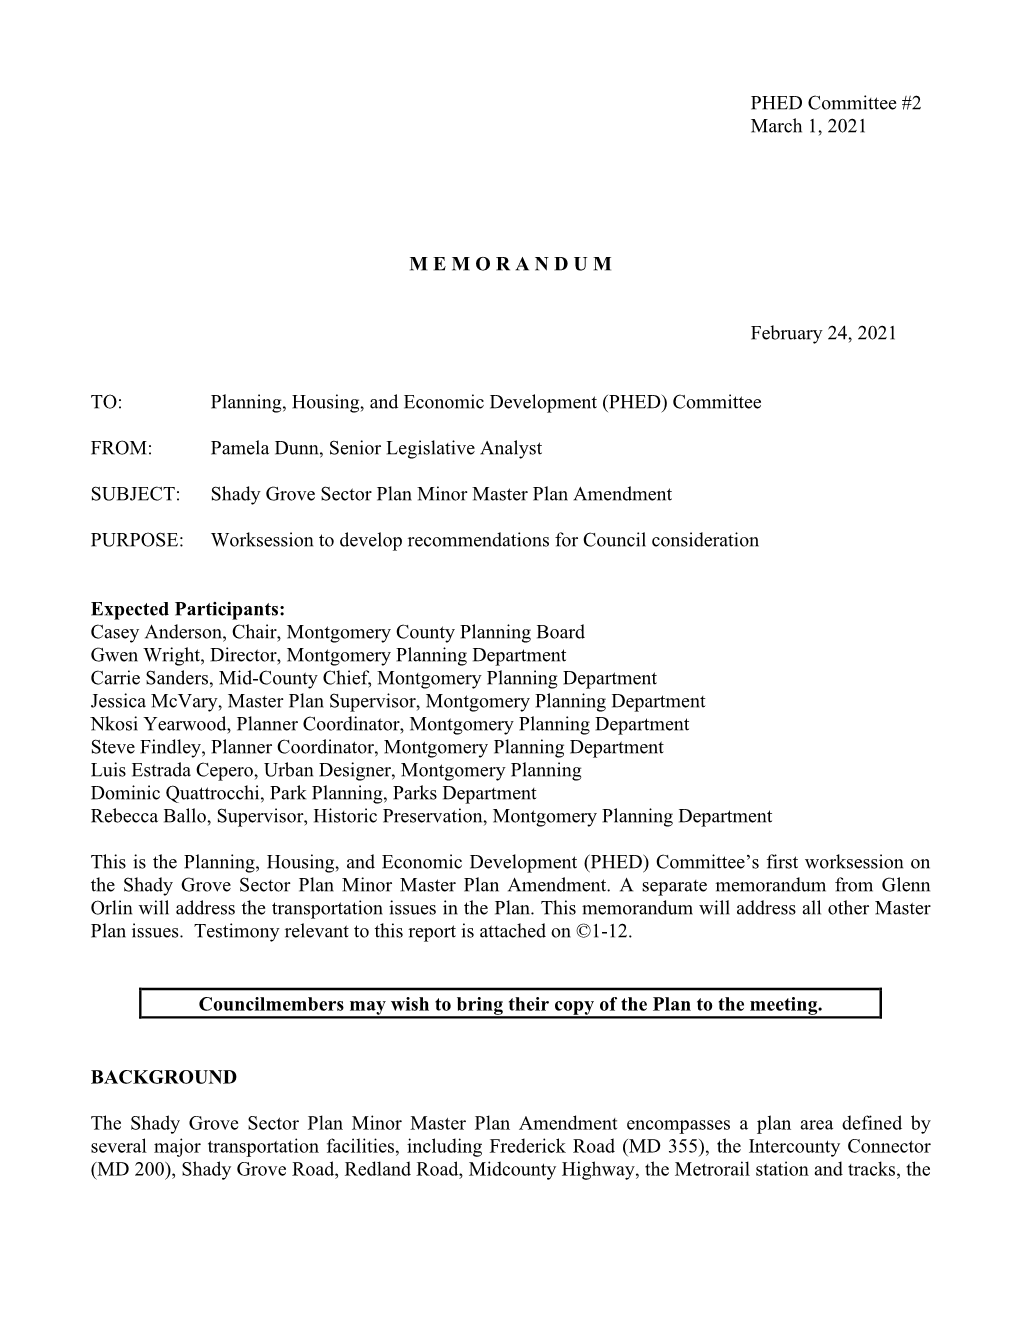 Planning, Housing, and Economic Development (PHED) Committee